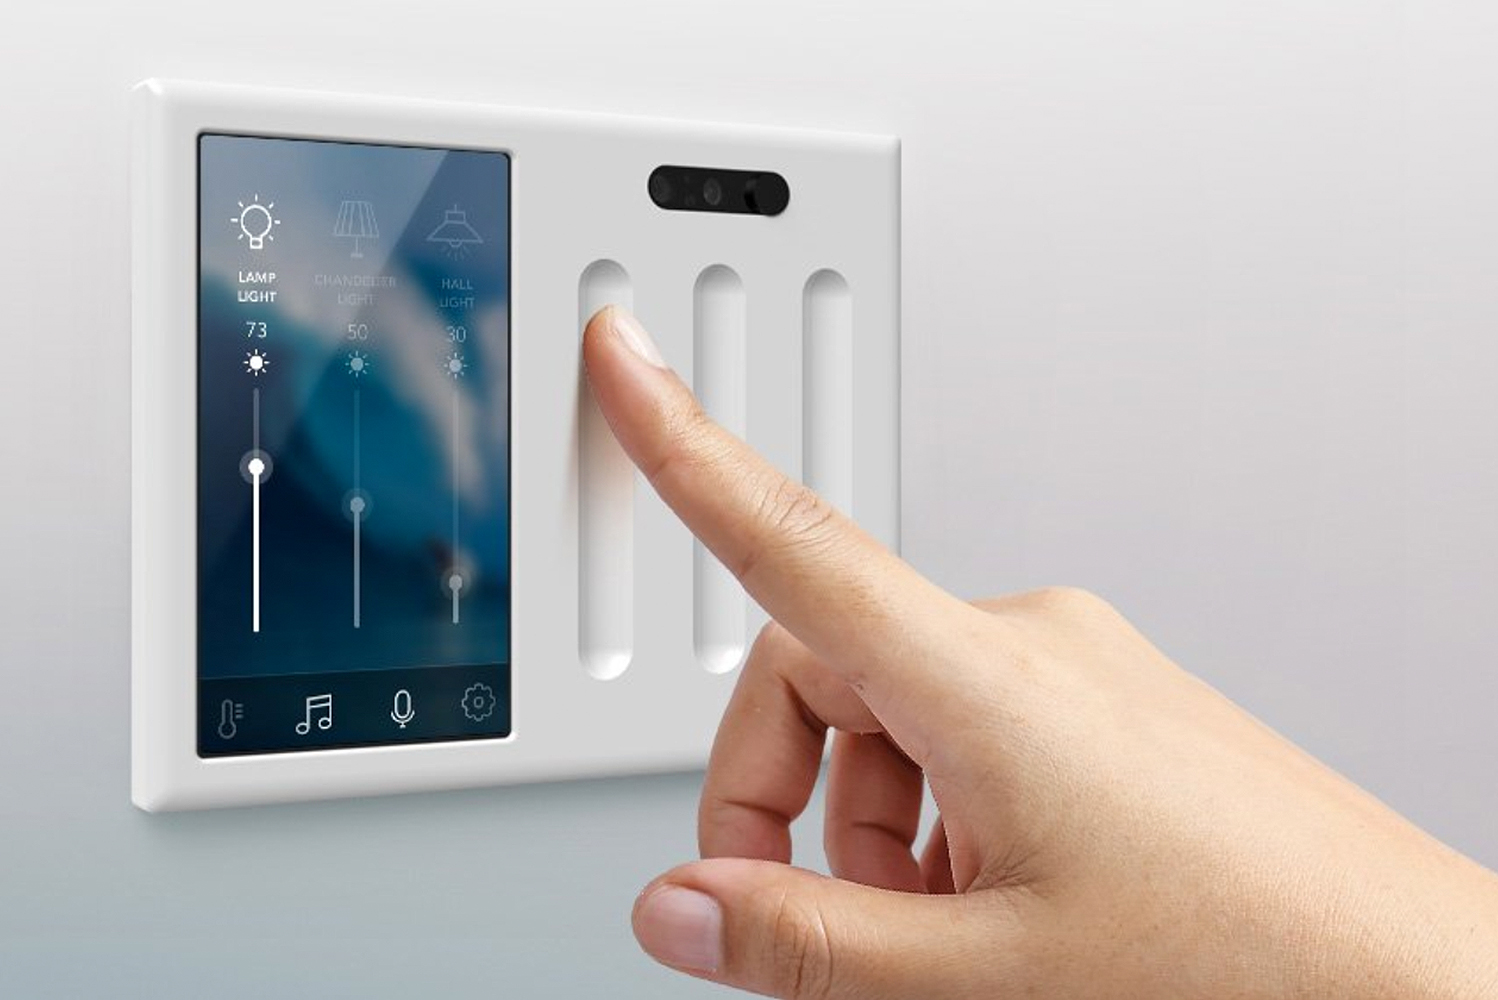 Brilliant Control is a smart lighting solution that replaces existing light switches